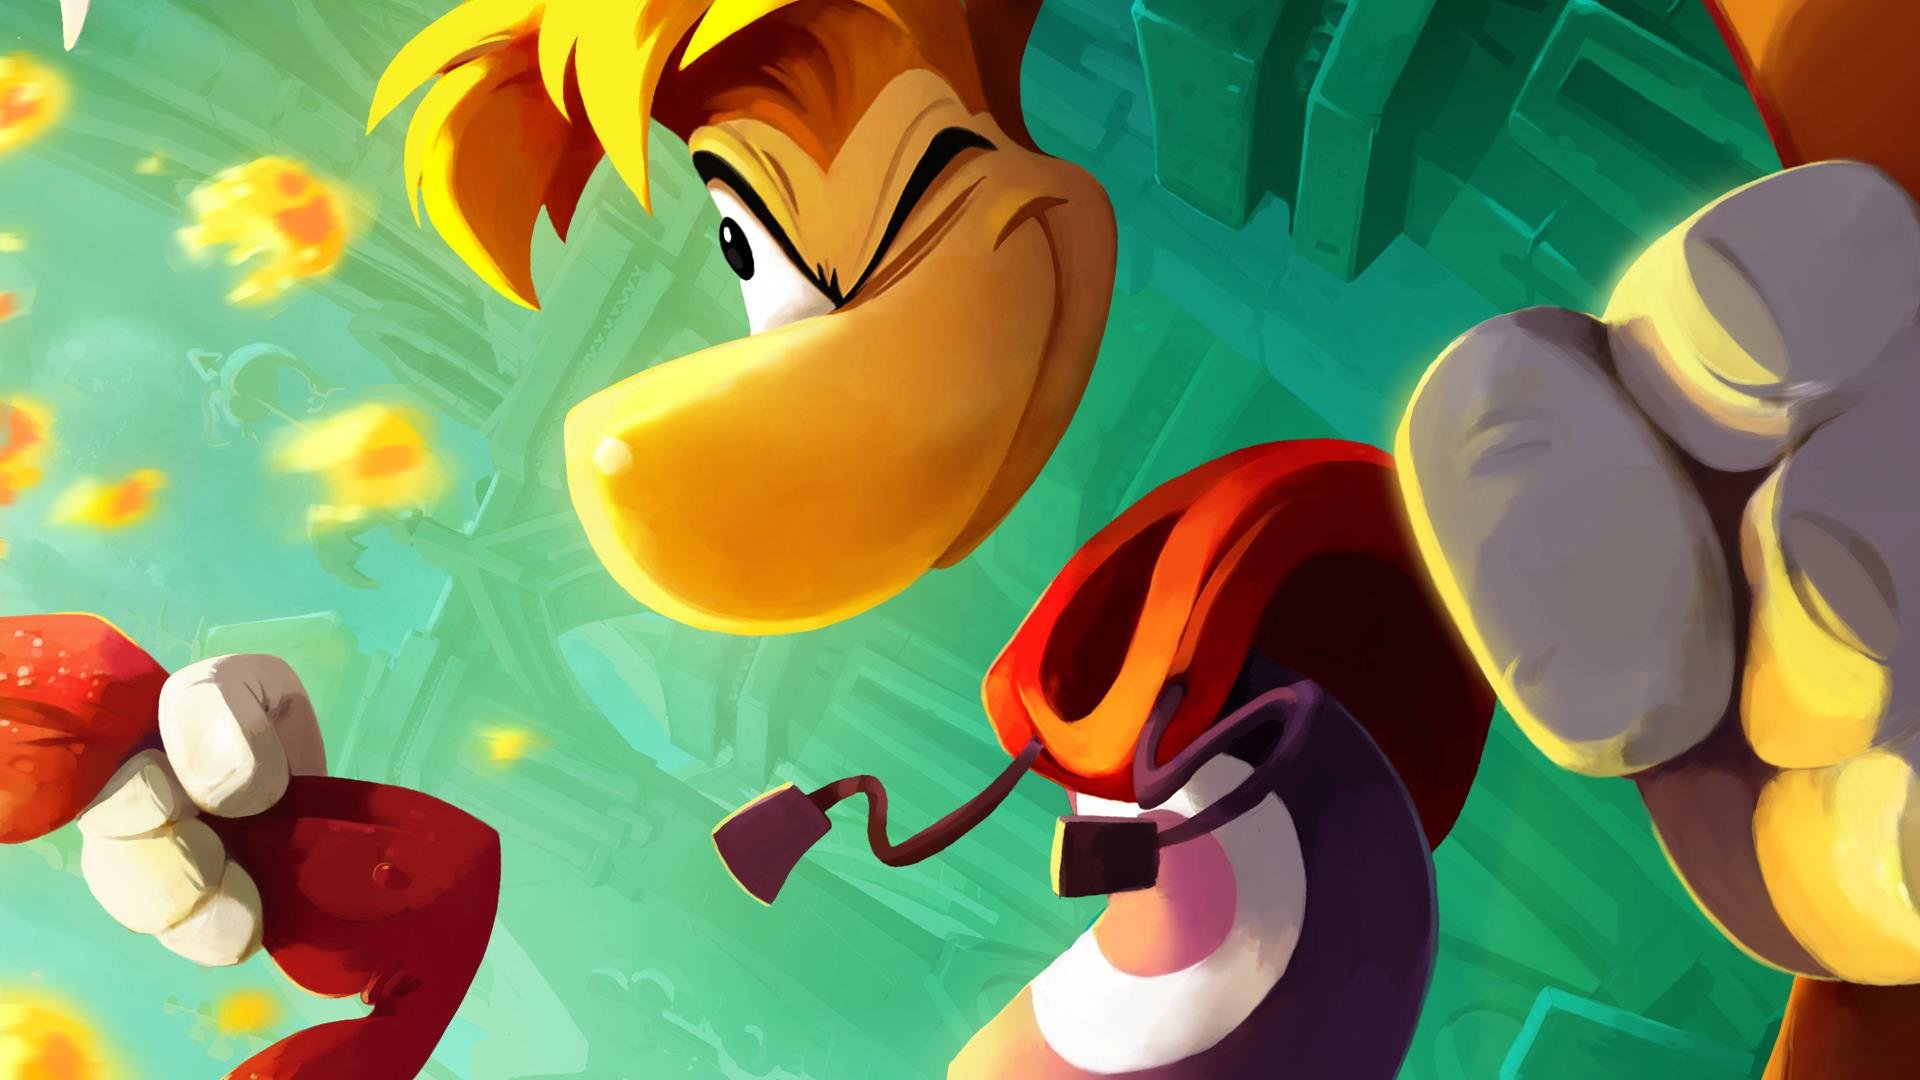 Download hd 1080p Rayman Legends desktop background ID:26531 for free